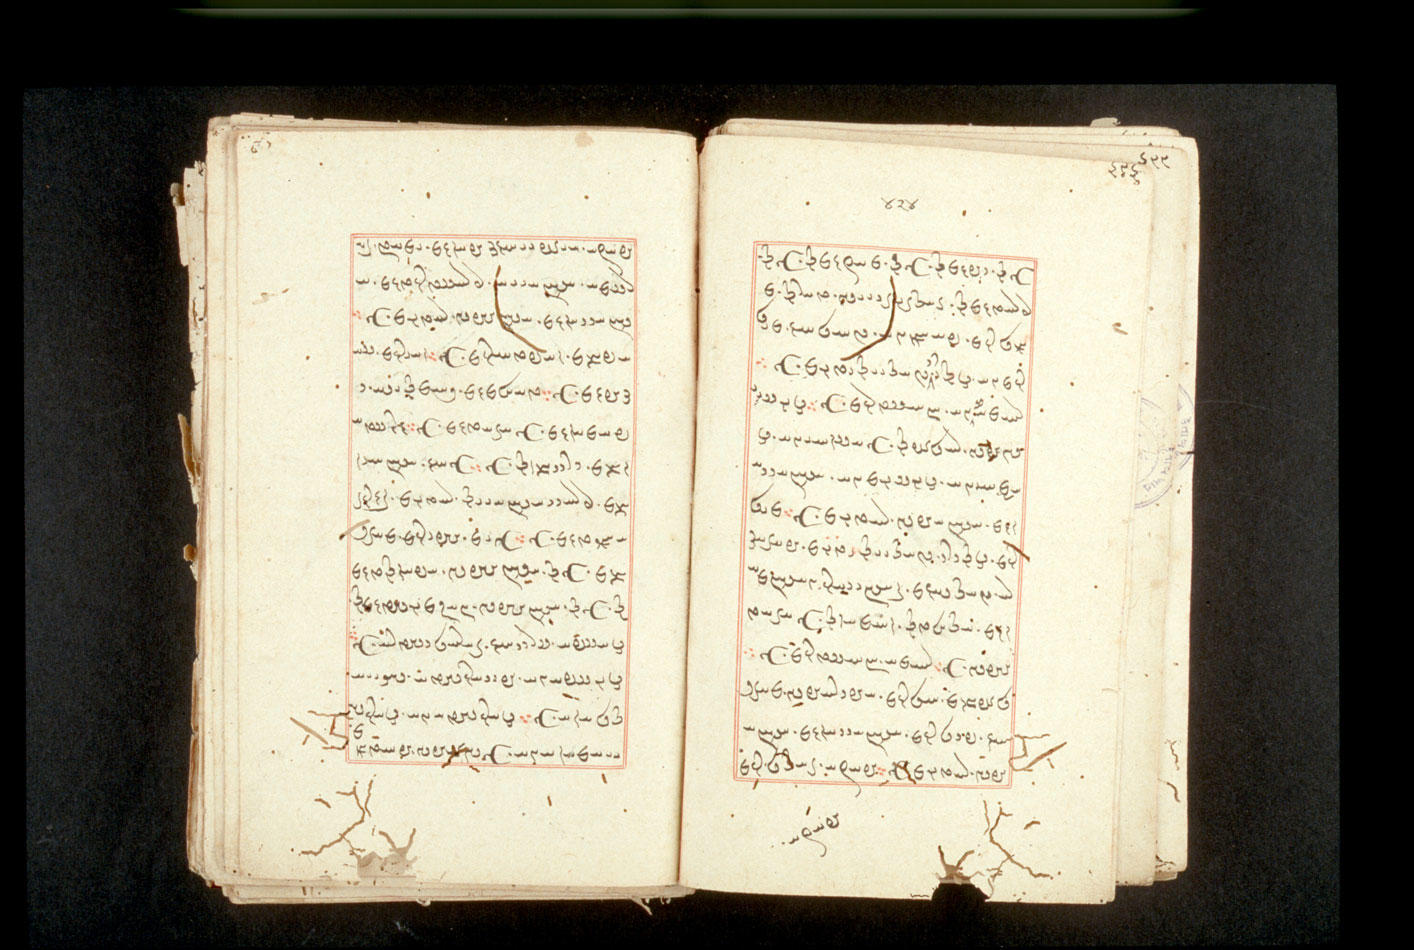 Folios 424v (right) and 425r (left)